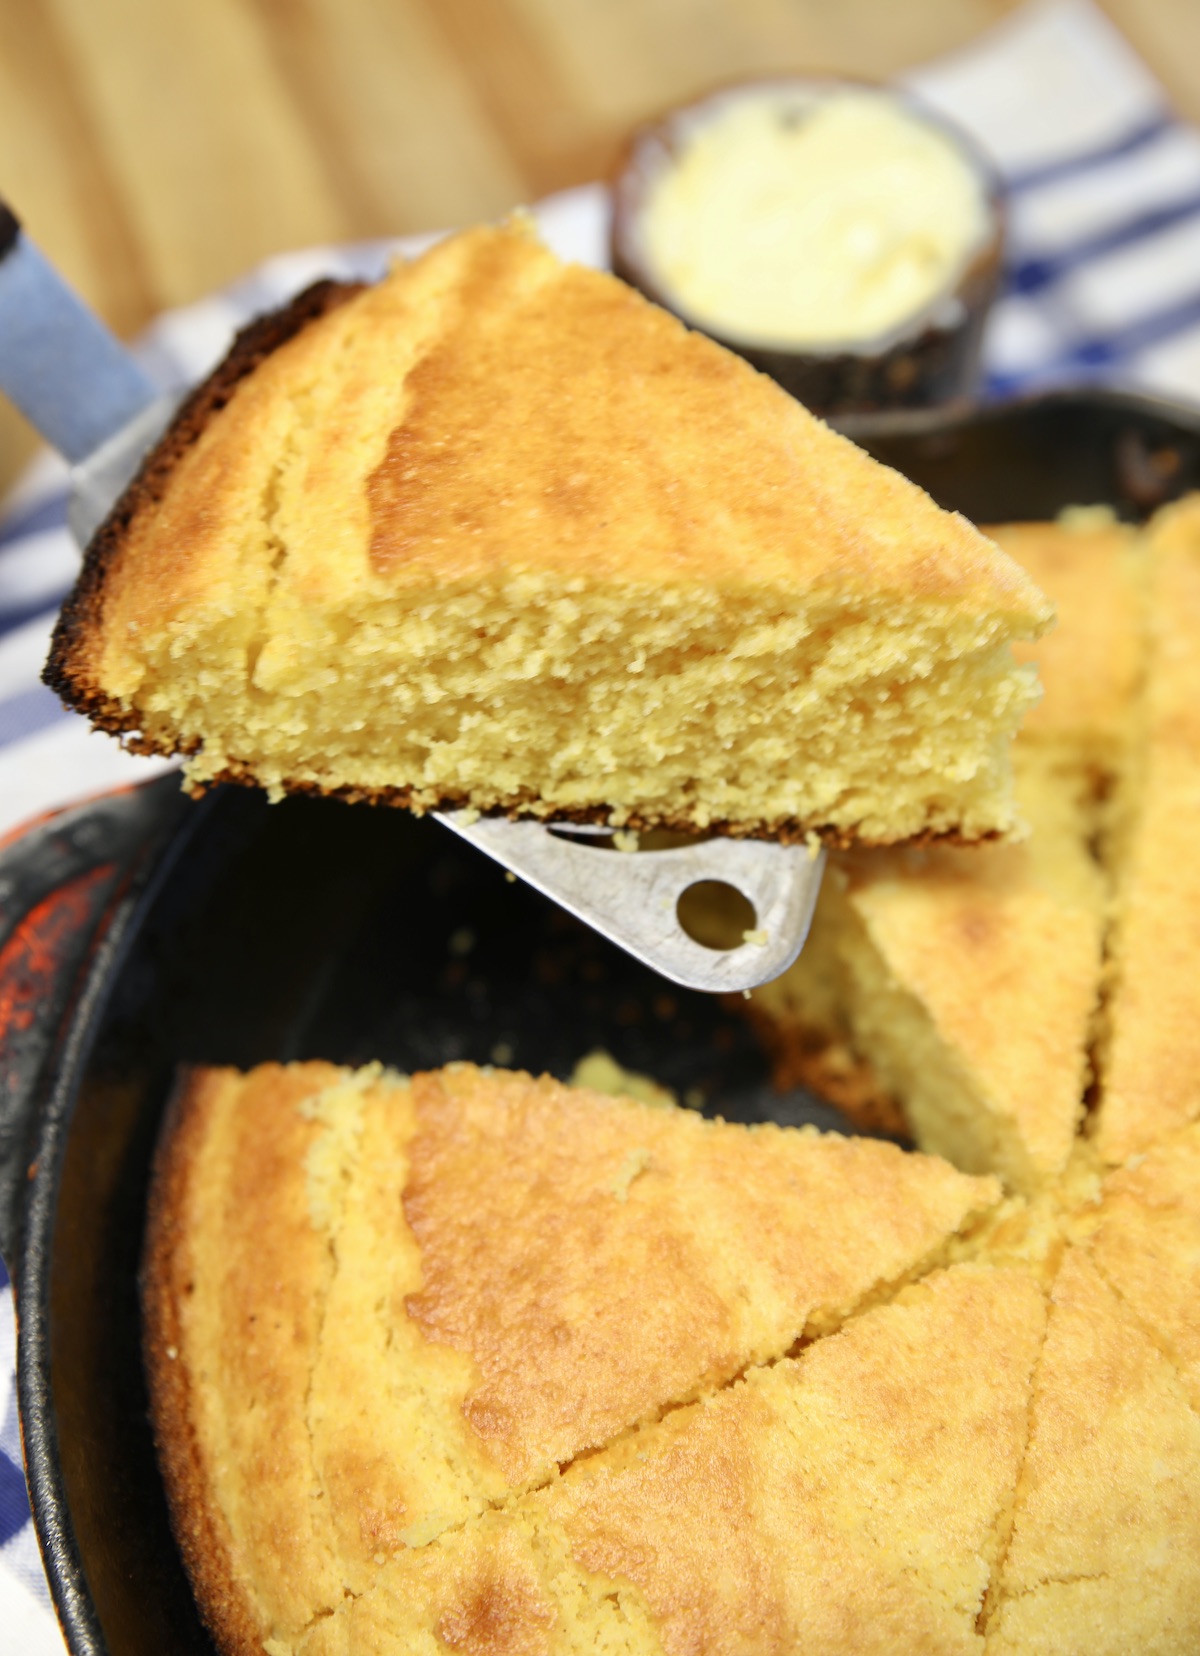 Wedge of cornbread serving from skillet.